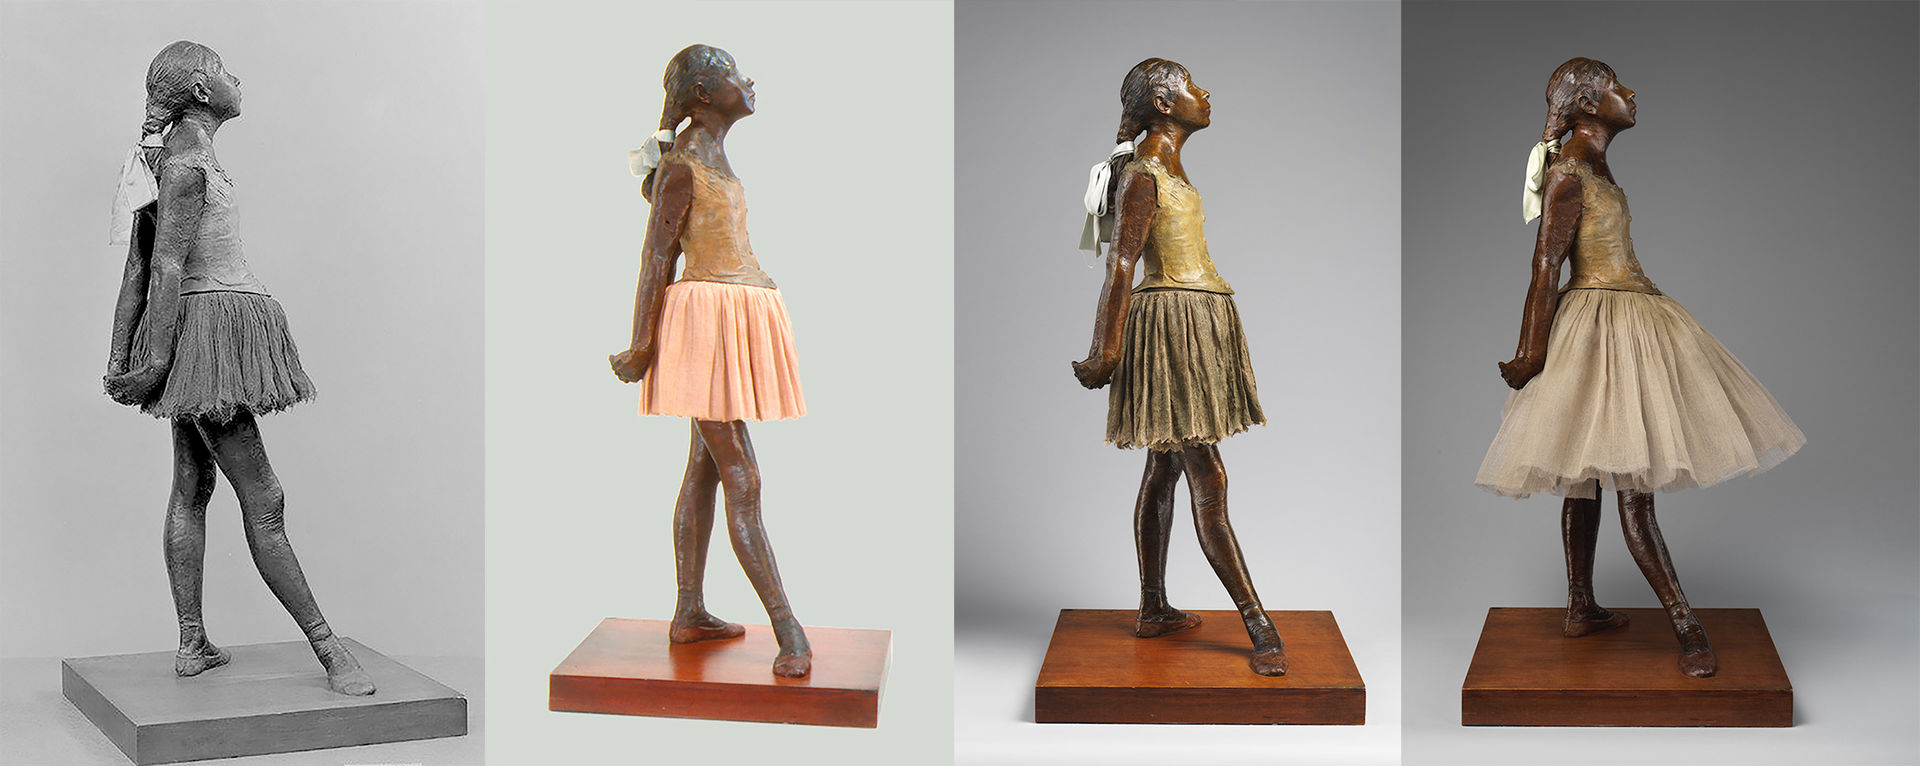 Four photographs of the Degas Dancer in different eras, wearing different tutus